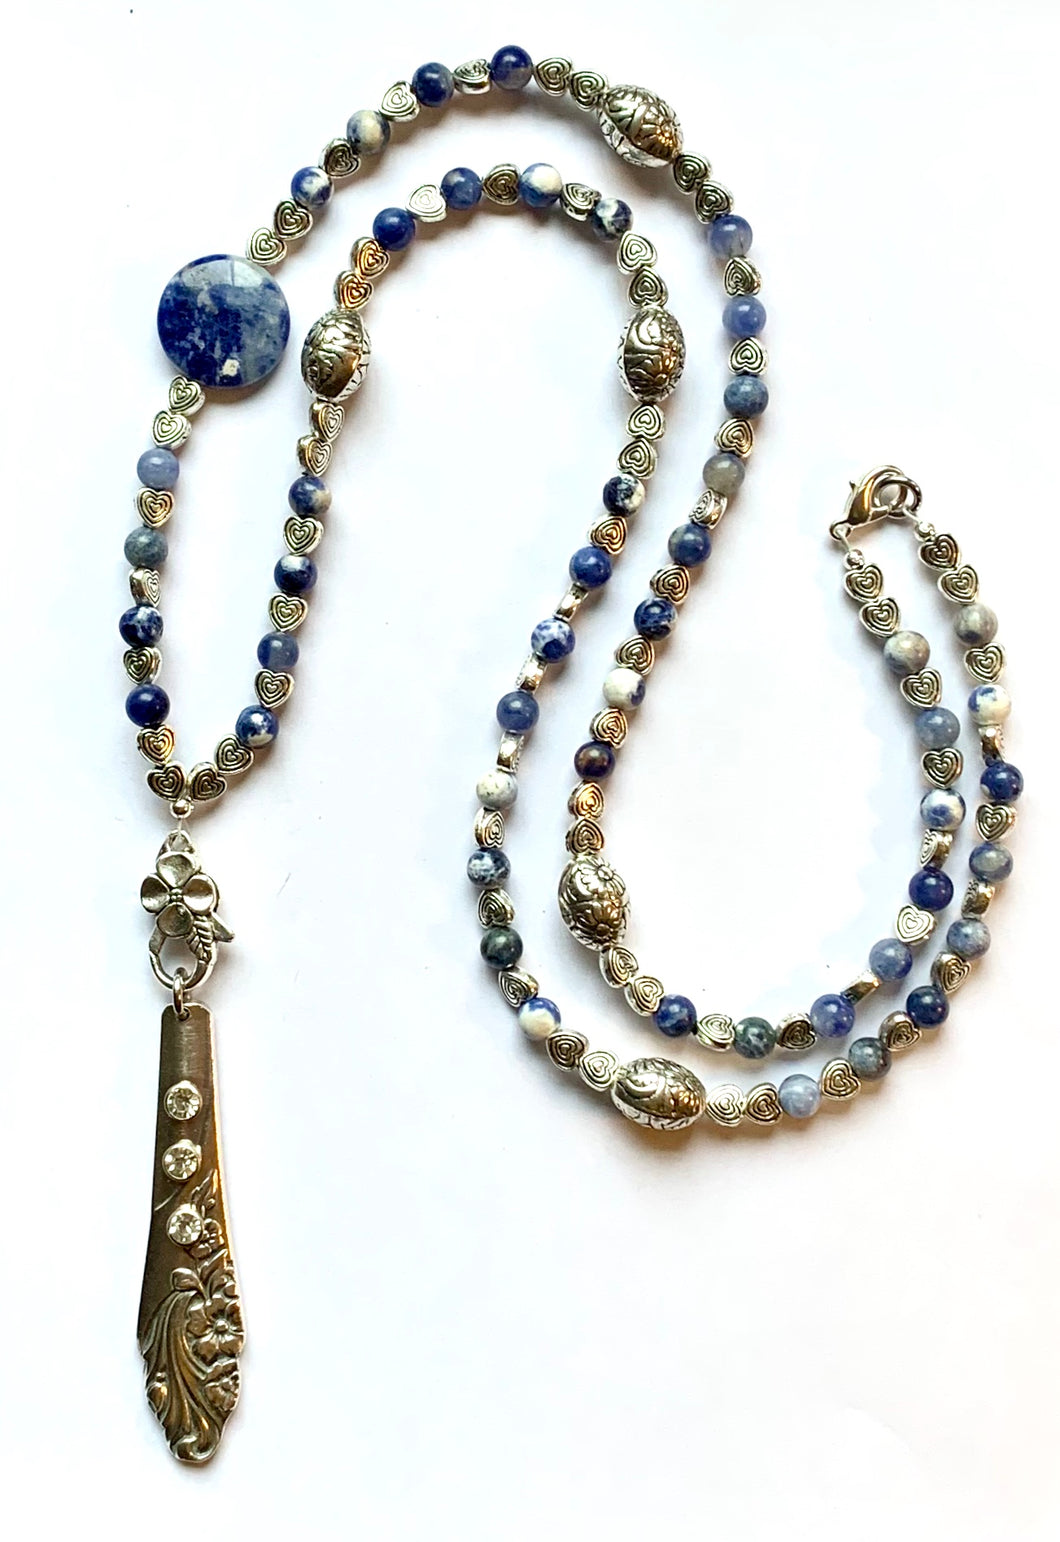 Sodalite “Evening Star Necklace